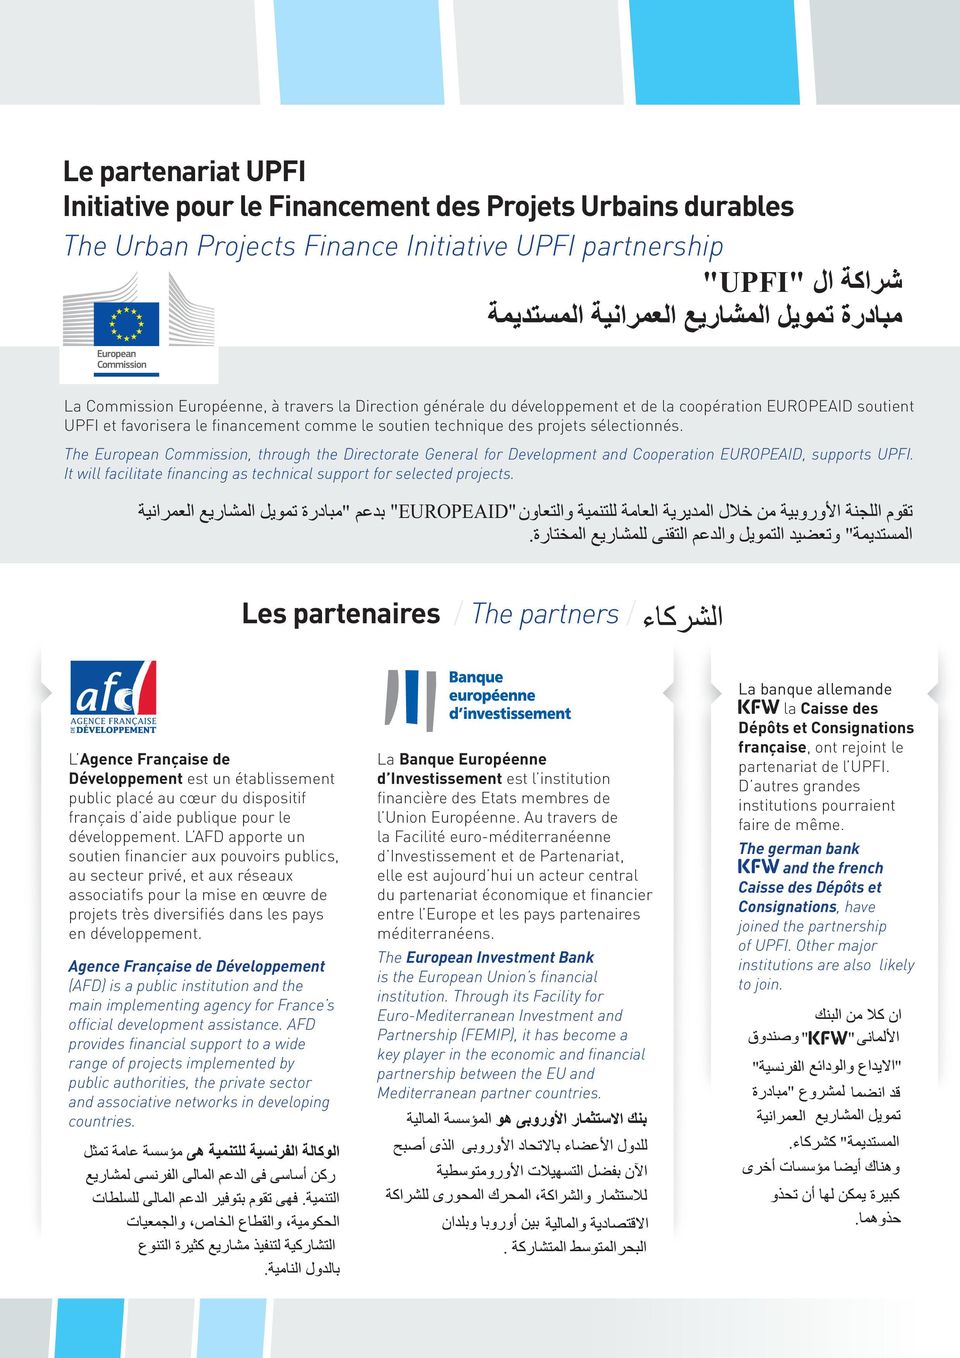 for Development and Cooperation EUROPEAID, supports UPFI It will facilitate financing as technical support for selected projects EUROPEAID Les partenaires / The partners / L Agence Française de